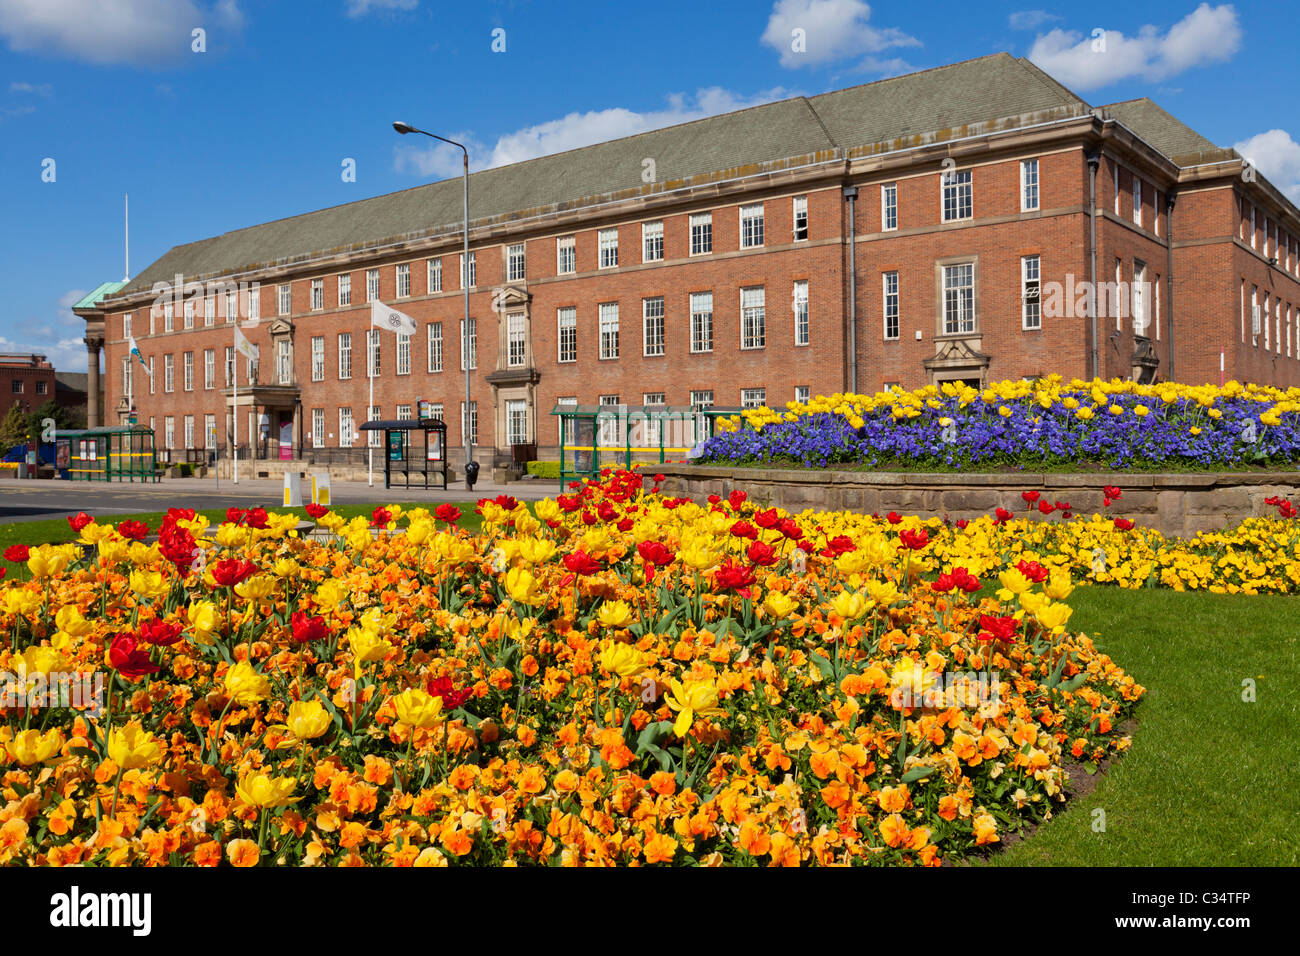 Floral display on a roundabout on Corporation street showing the Council house offices Derby city centre Derbyshire England GB UK Europe Stock Photo